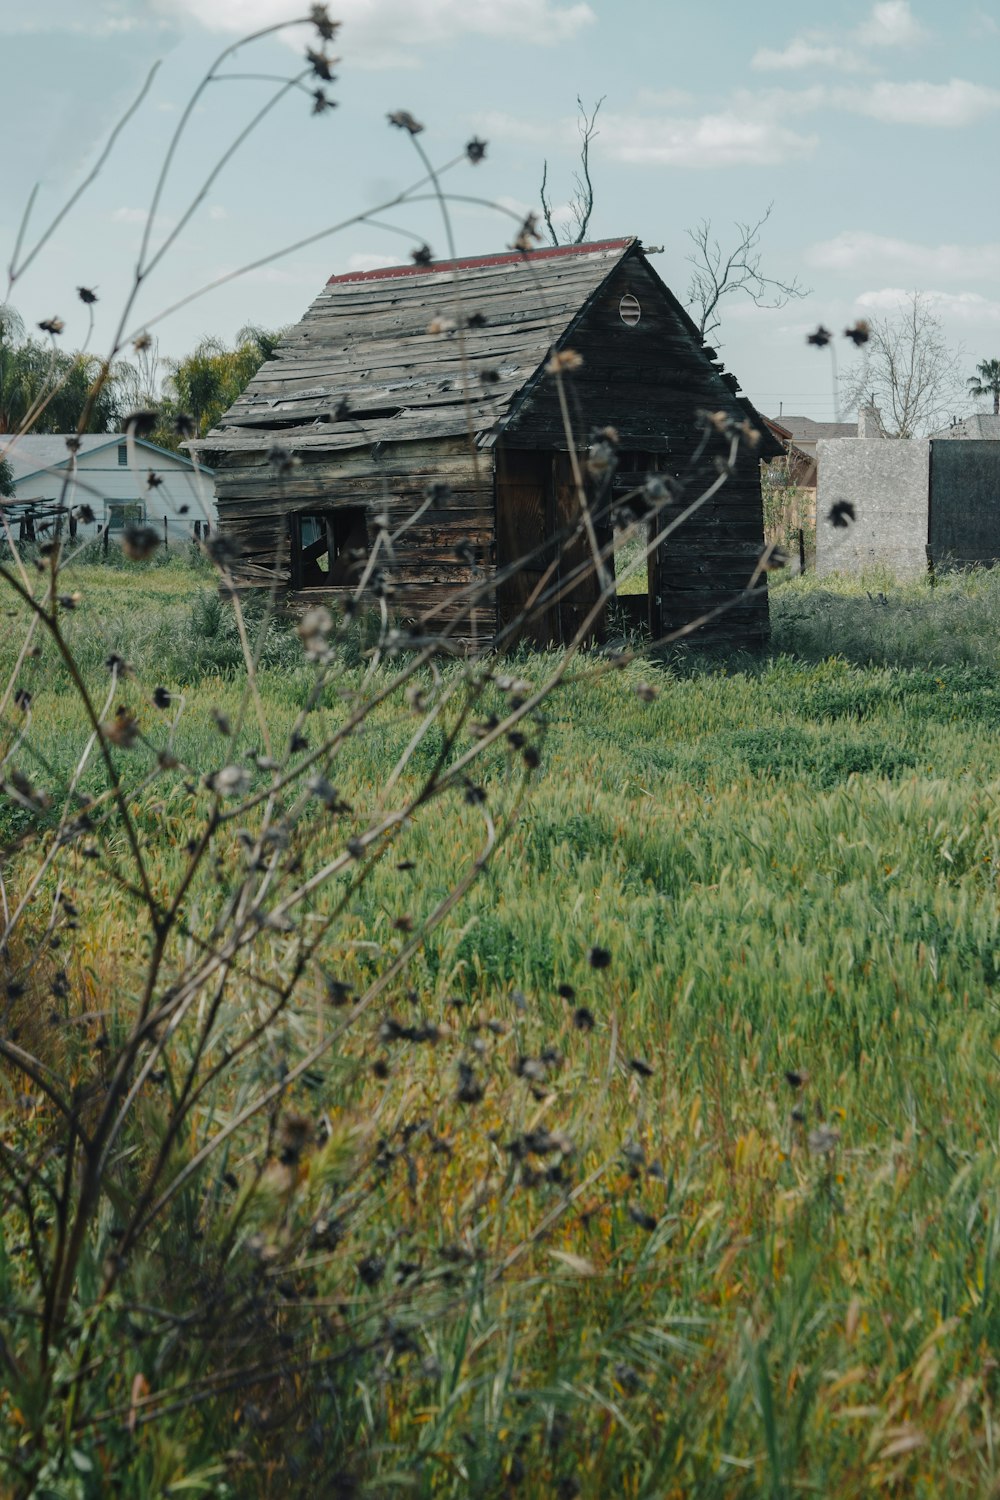 an old wooden shack in a grassy field